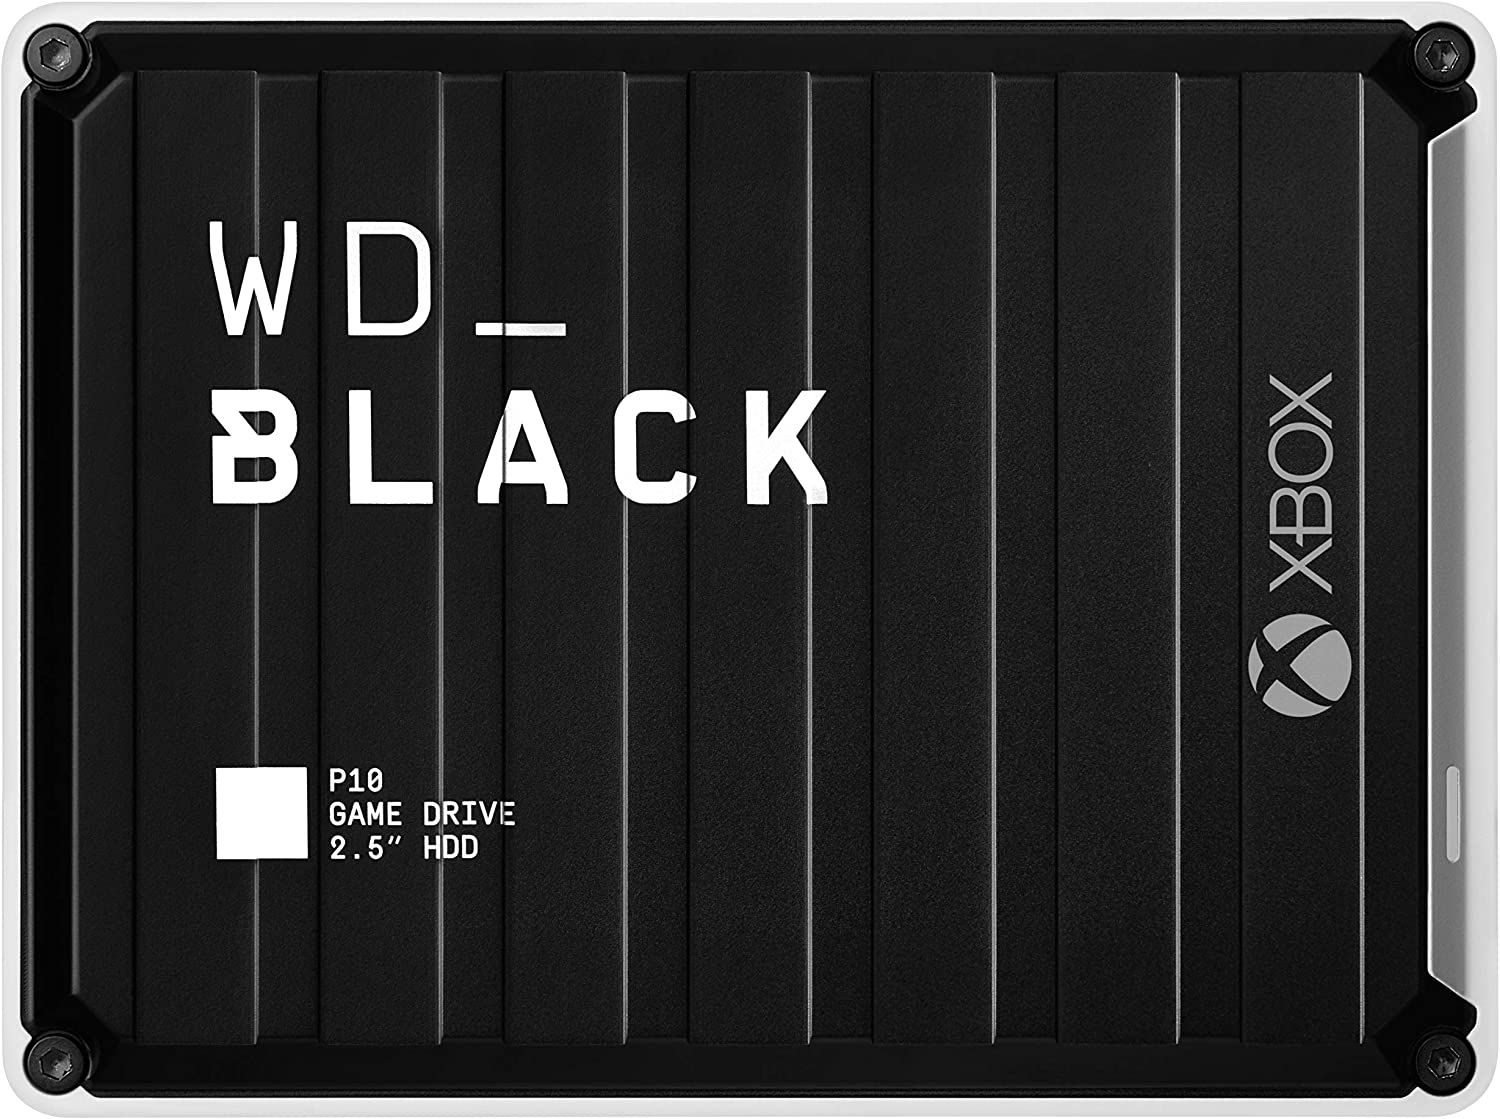 WD_BLACK P10 Game Drive for Xbox